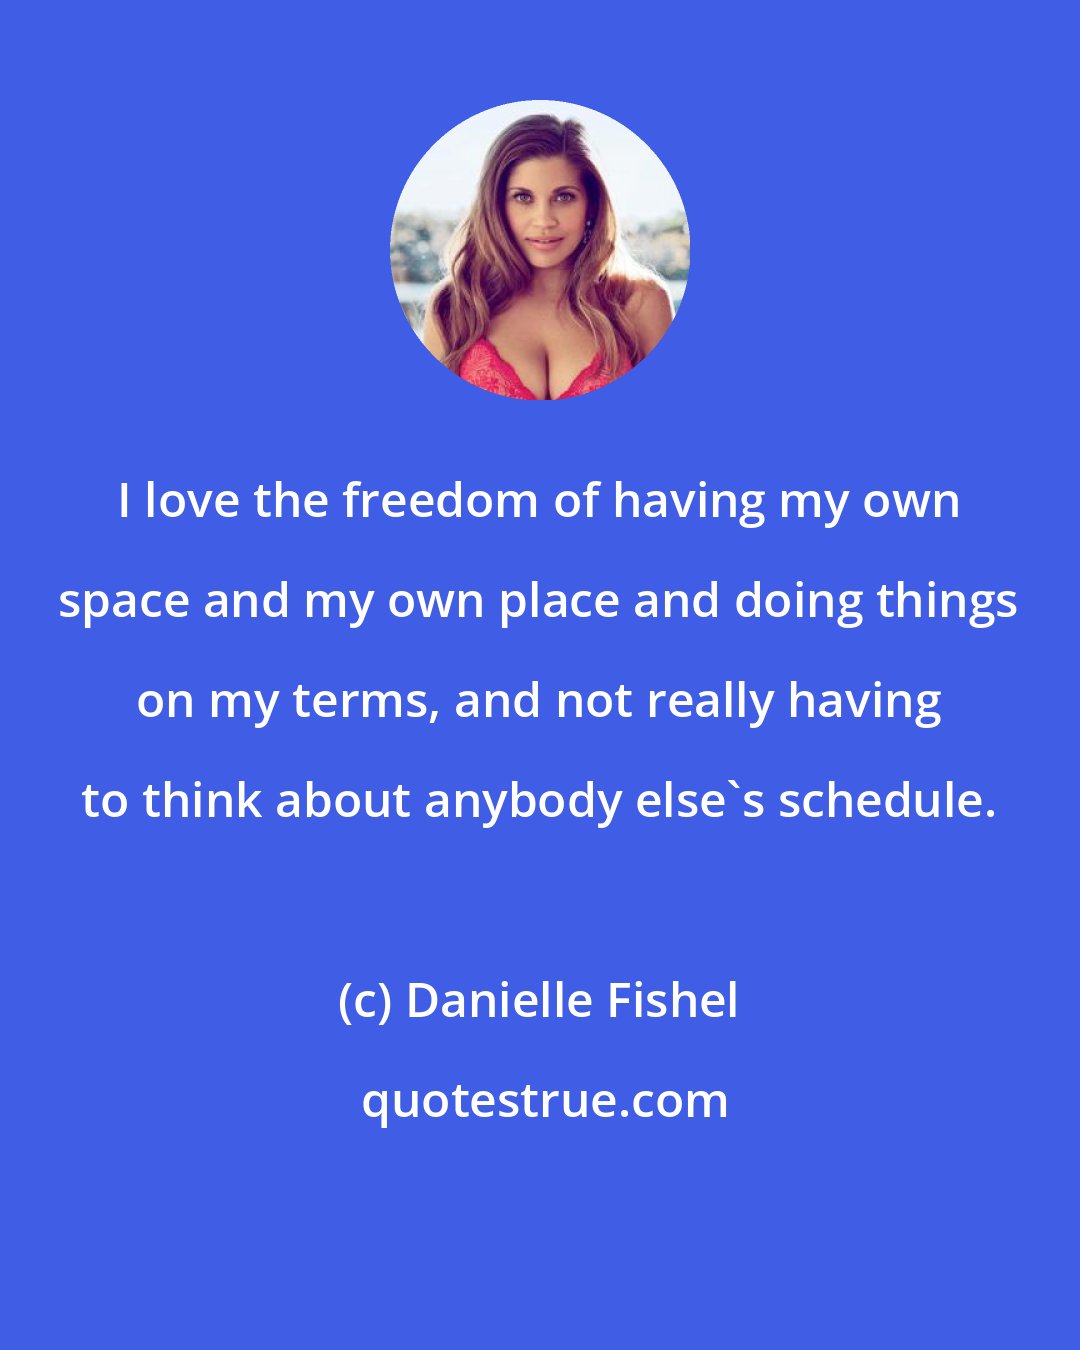 Danielle Fishel: I love the freedom of having my own space and my own place and doing things on my terms, and not really having to think about anybody else's schedule.